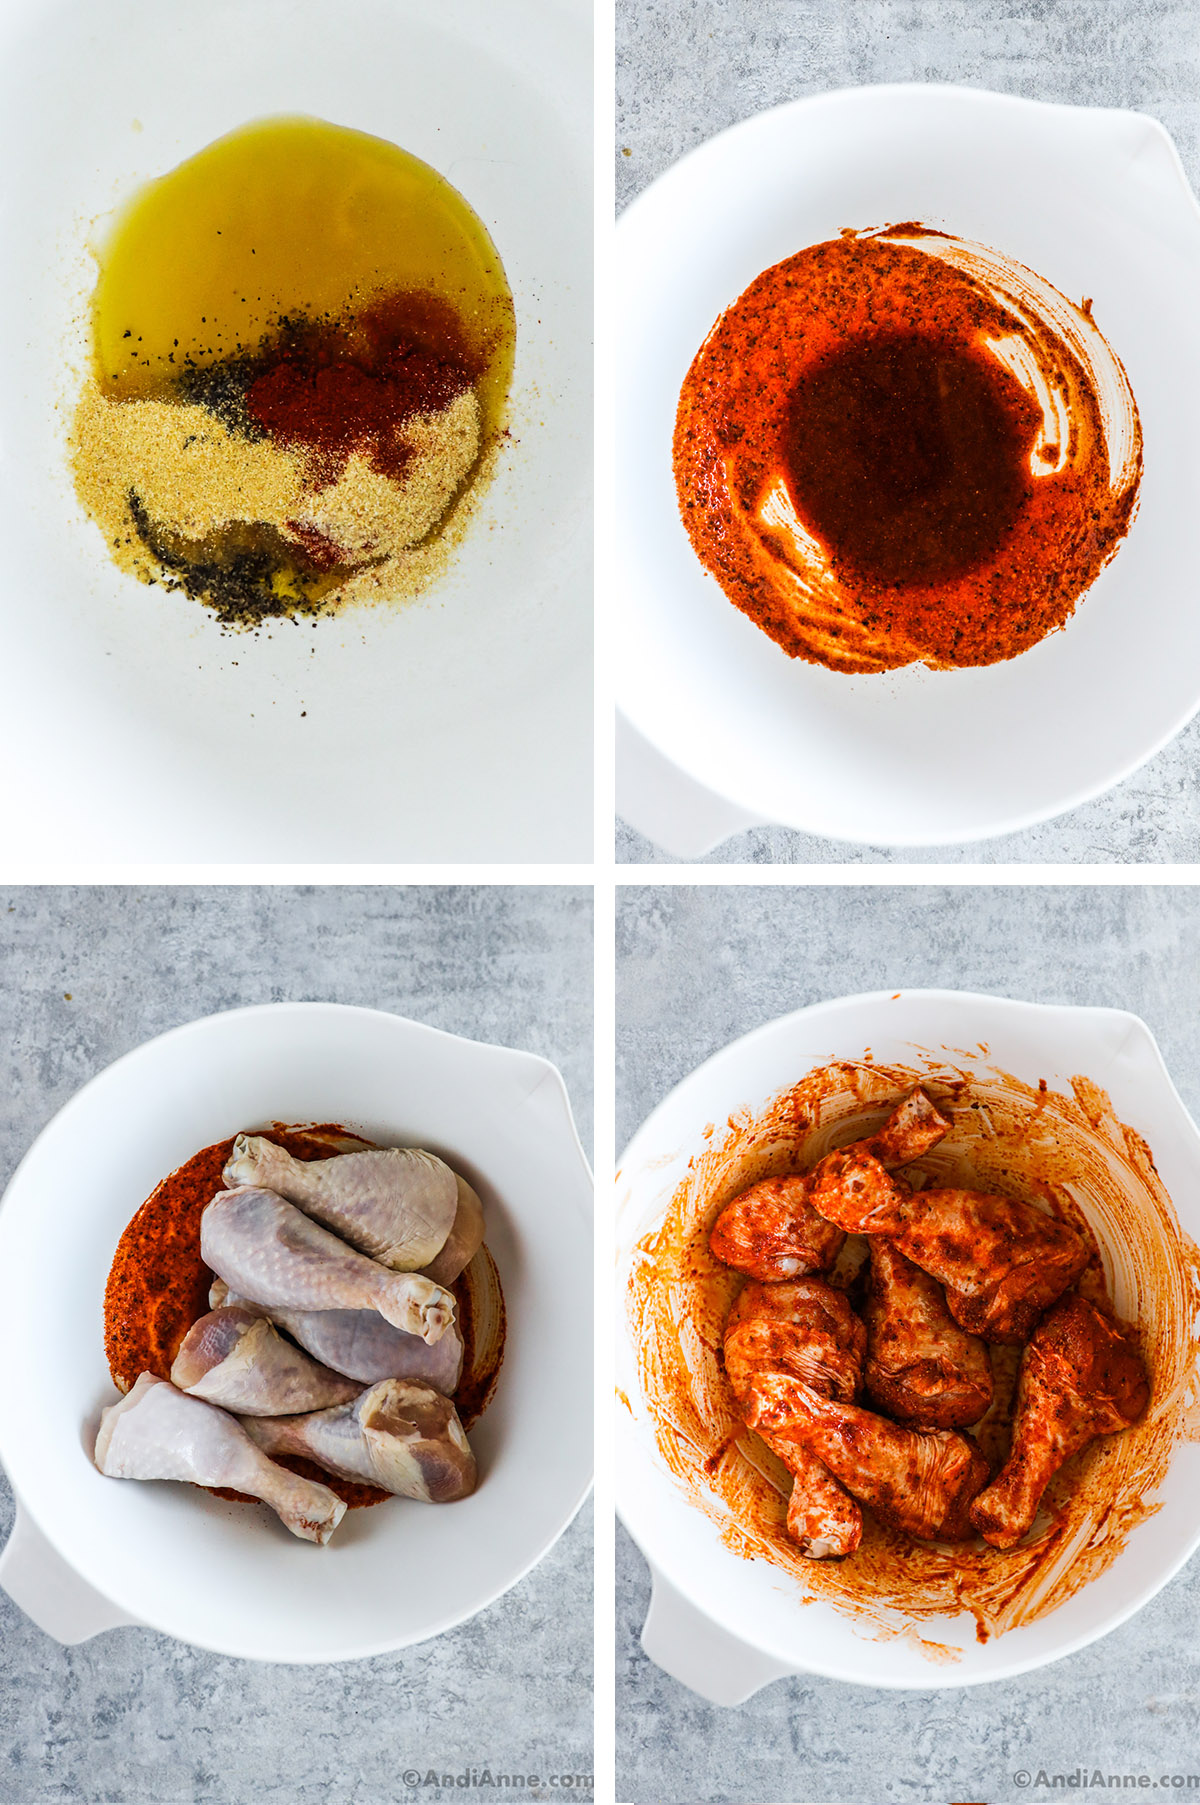 Four images, first two are a bowl with oil and spices, first unmixed then mixed. Second two images are raw chicken legs dumped into that bowl, first unmixed and then mixed.